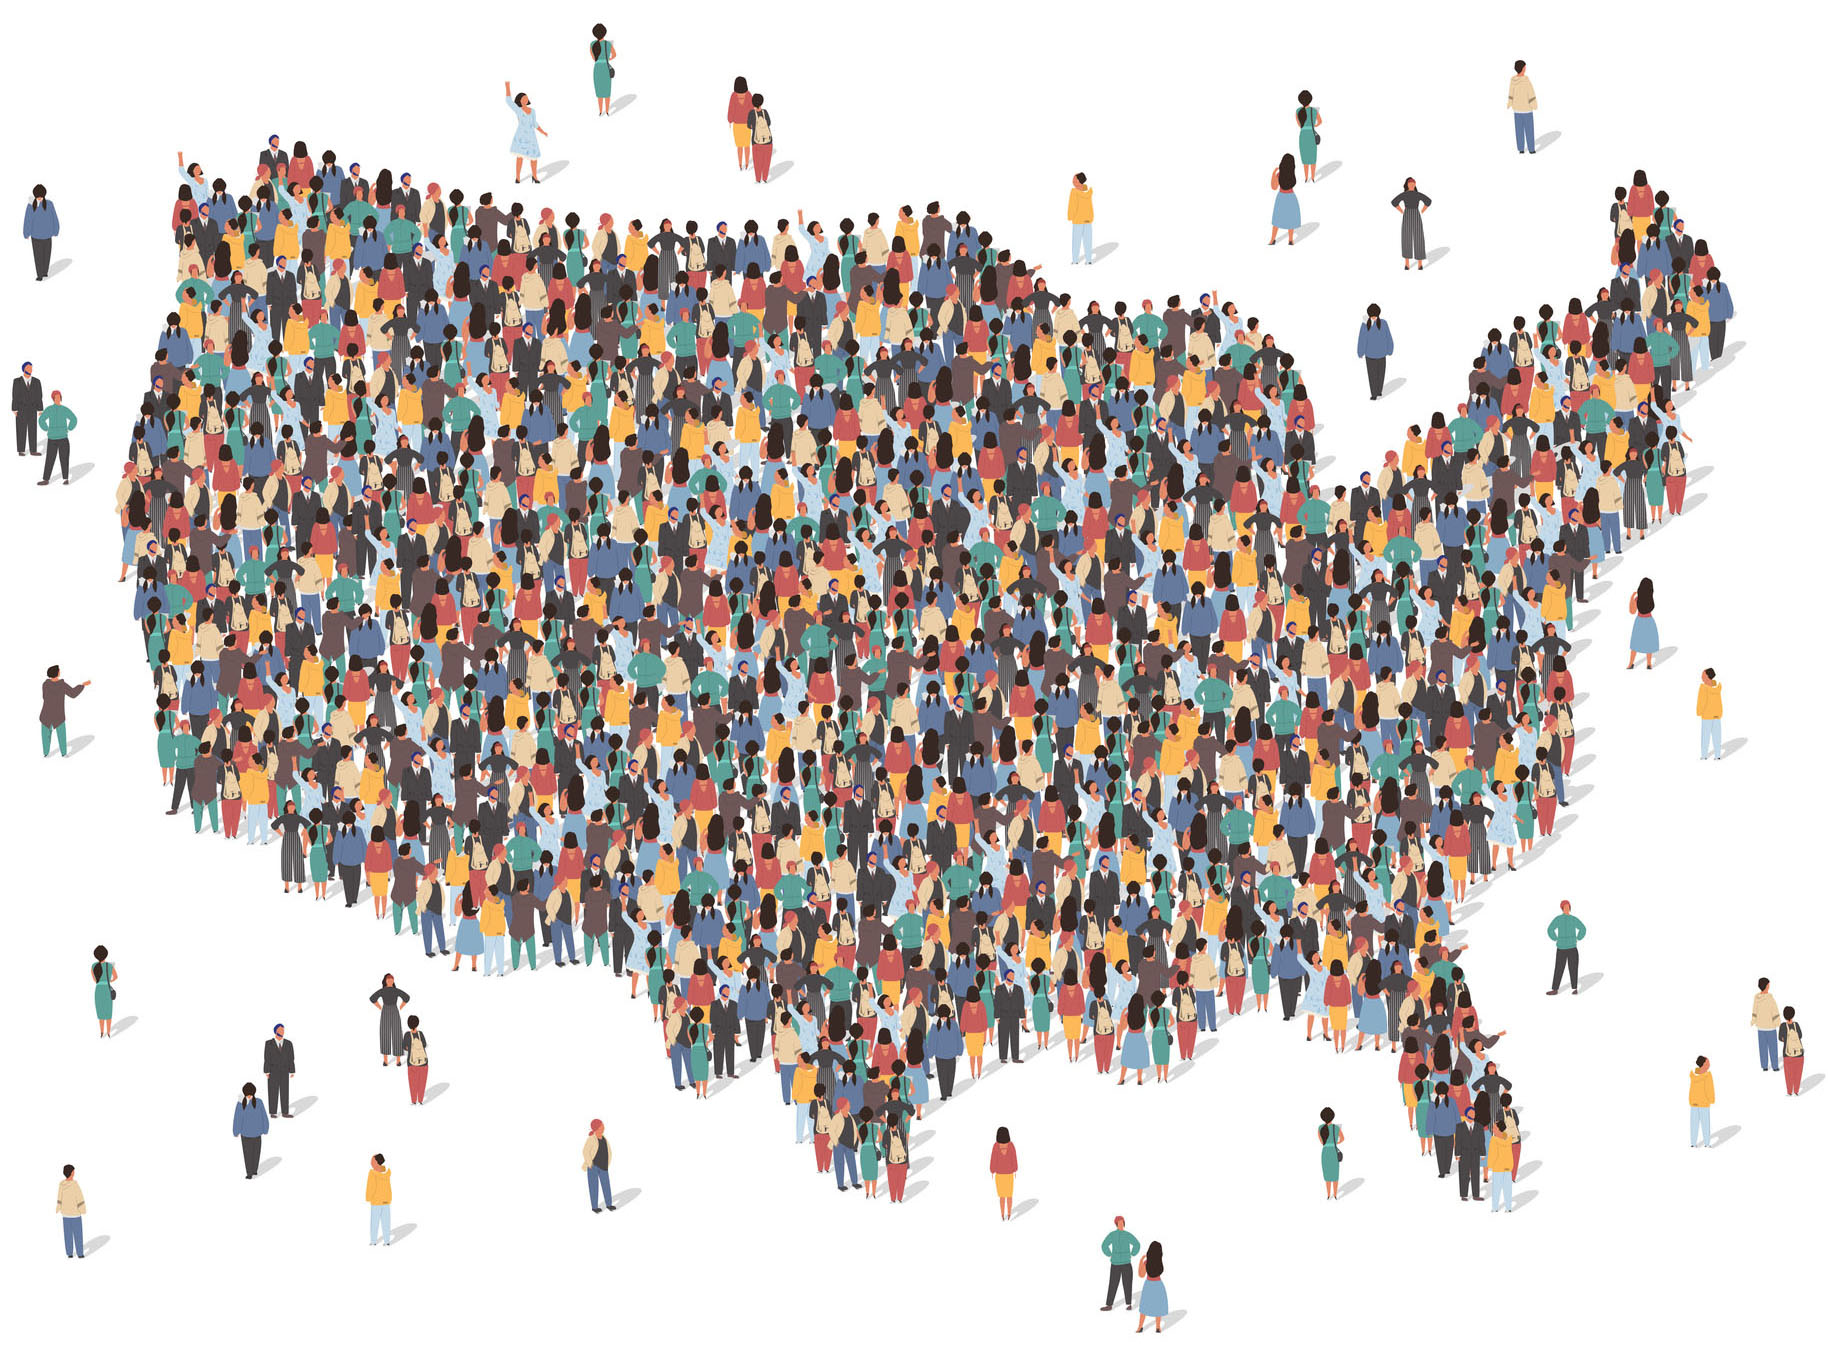 Illustration - a conceptual map of U.S. made of diverse people